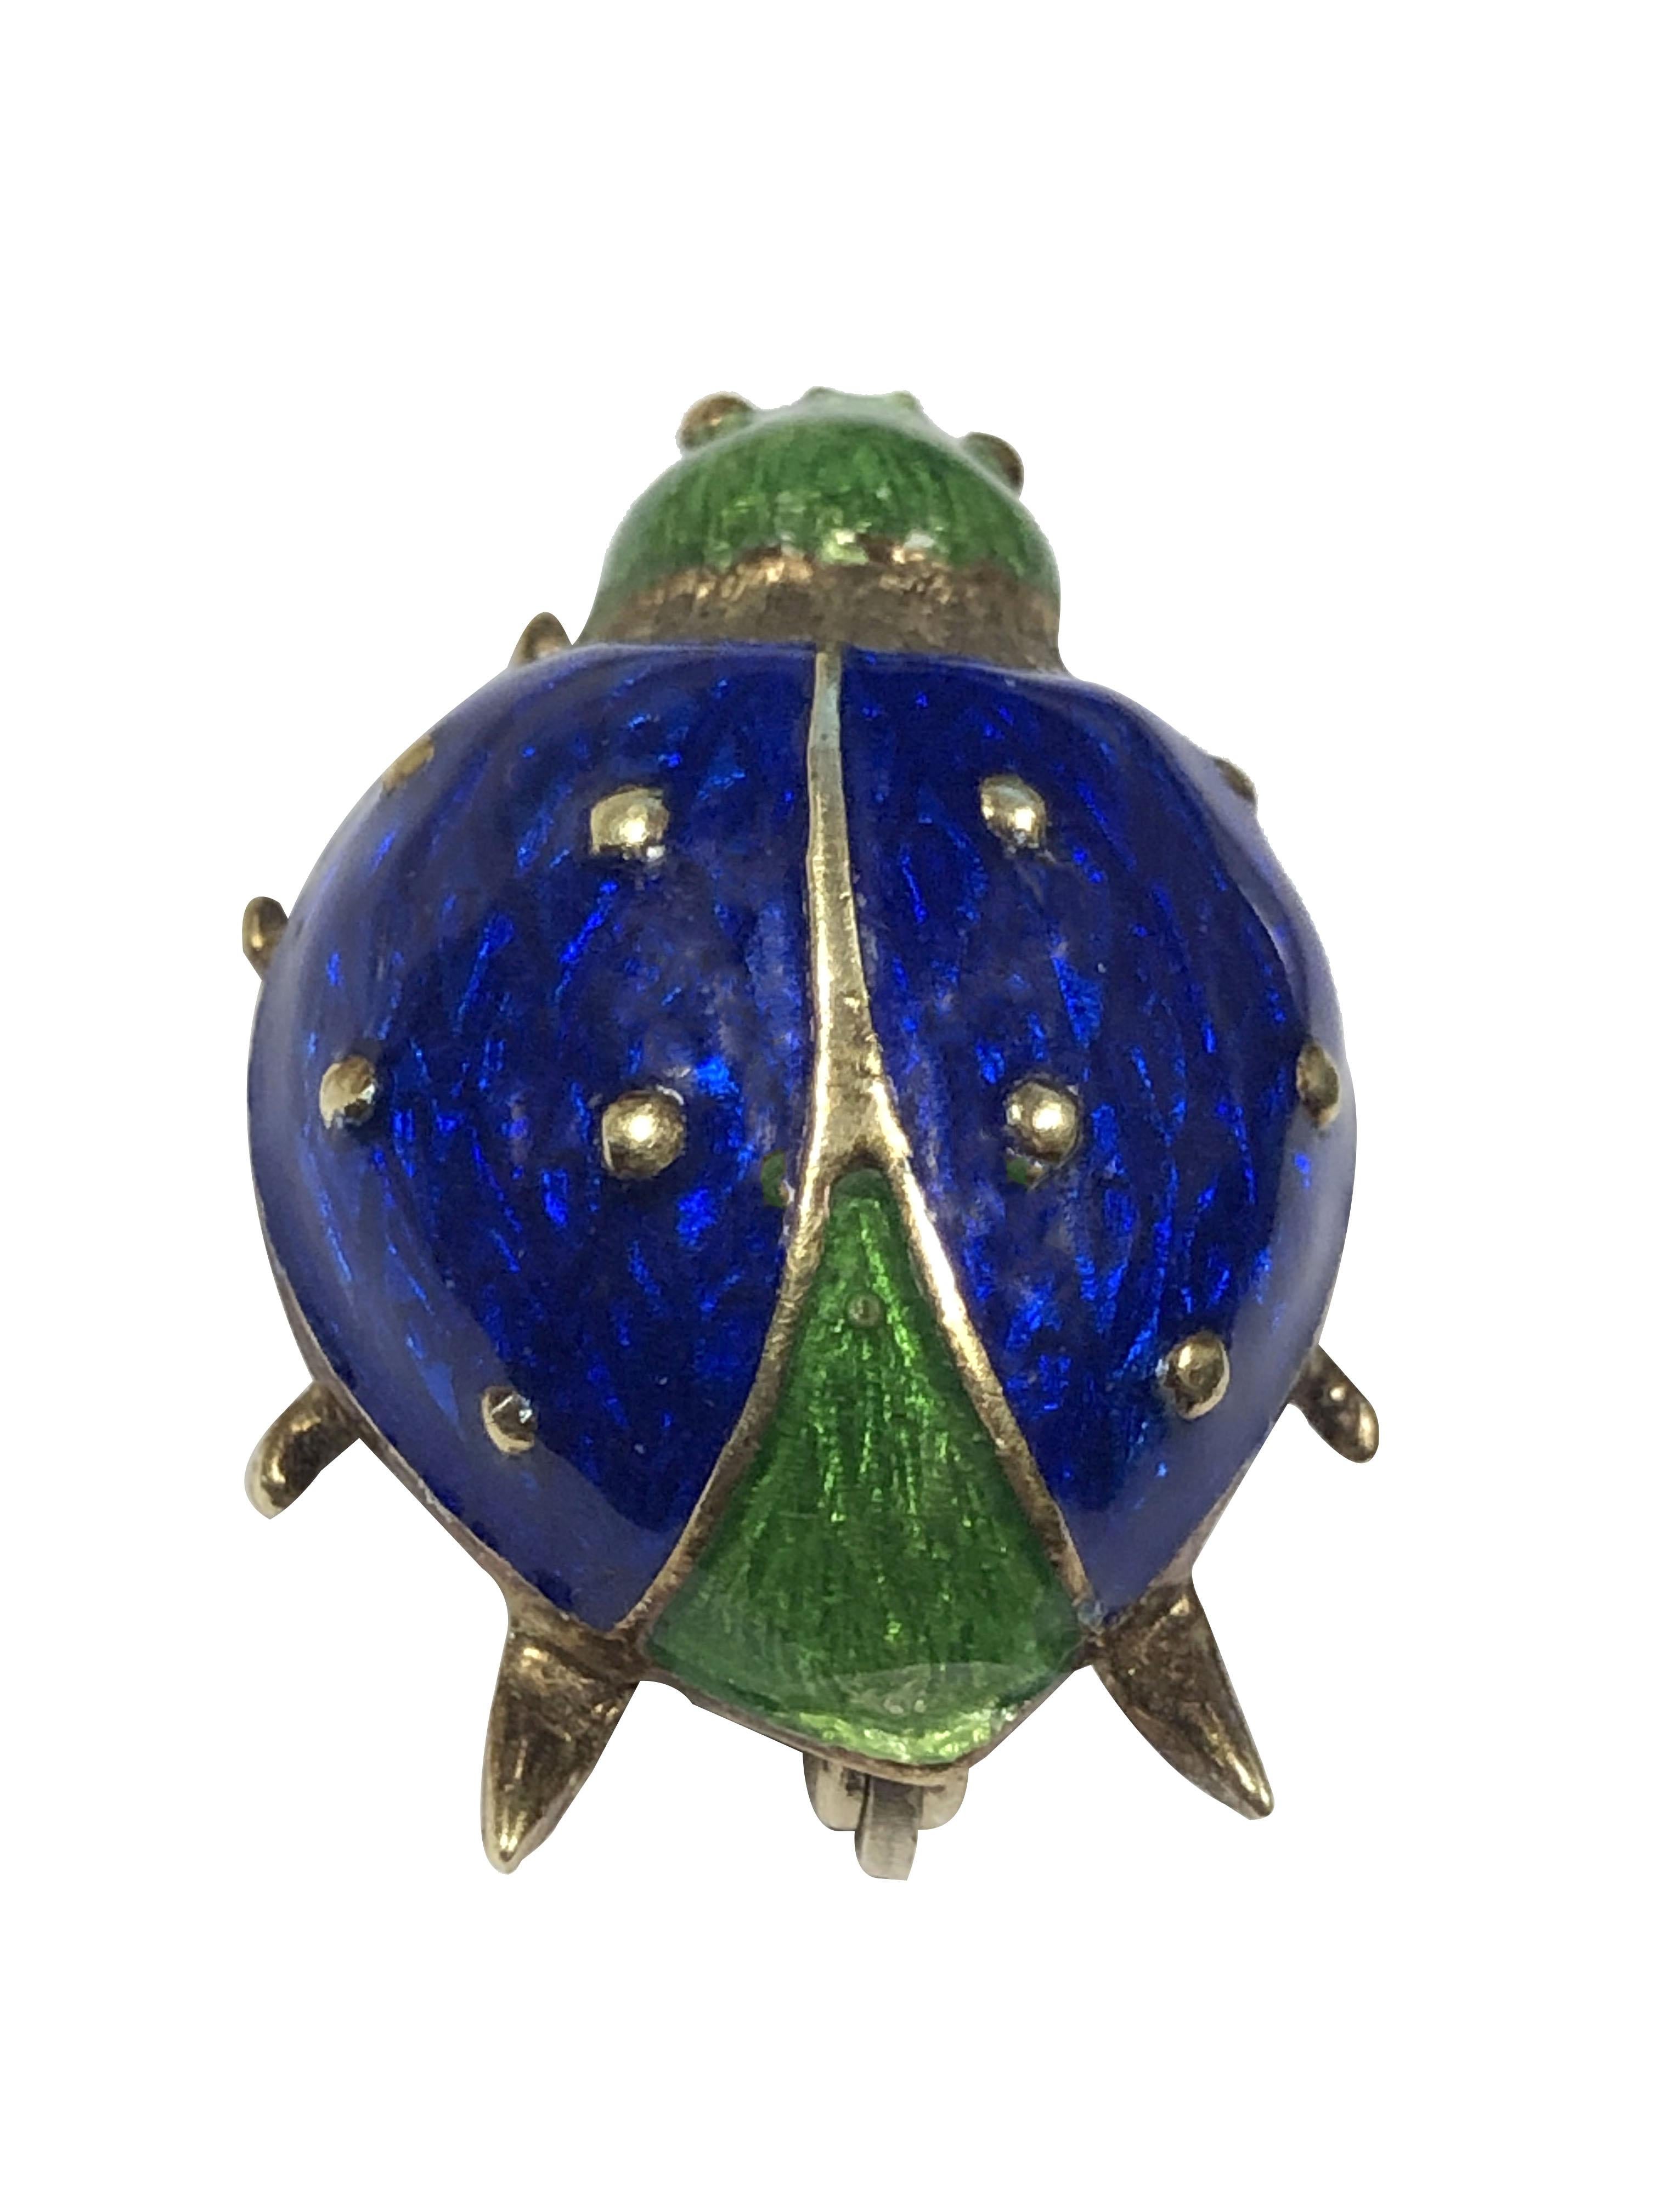 Circa 1980 Martine 14k Yellow Gold bug Brooch, measuring 1 inch X 5/8 inch and weighing 6.6 Grams, finished in bright colorful Guilloche Enamel. 